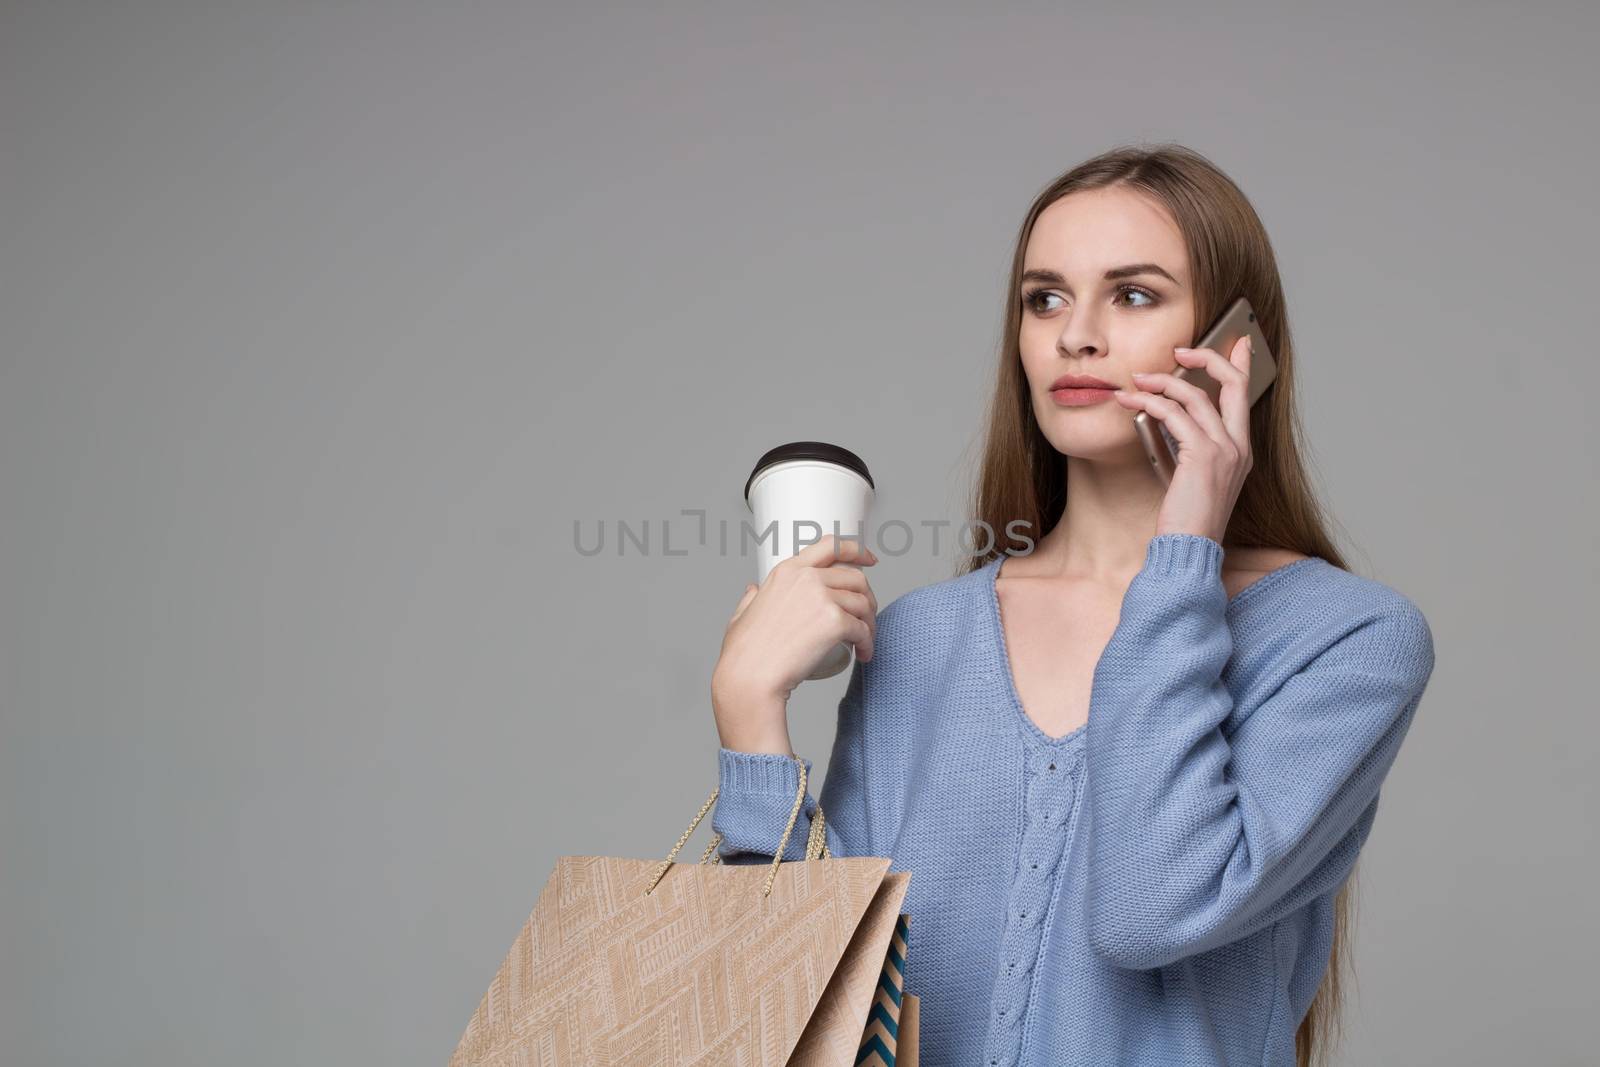 Girl in blue with bags, paper glass, talks by smartphone by VeraVerano